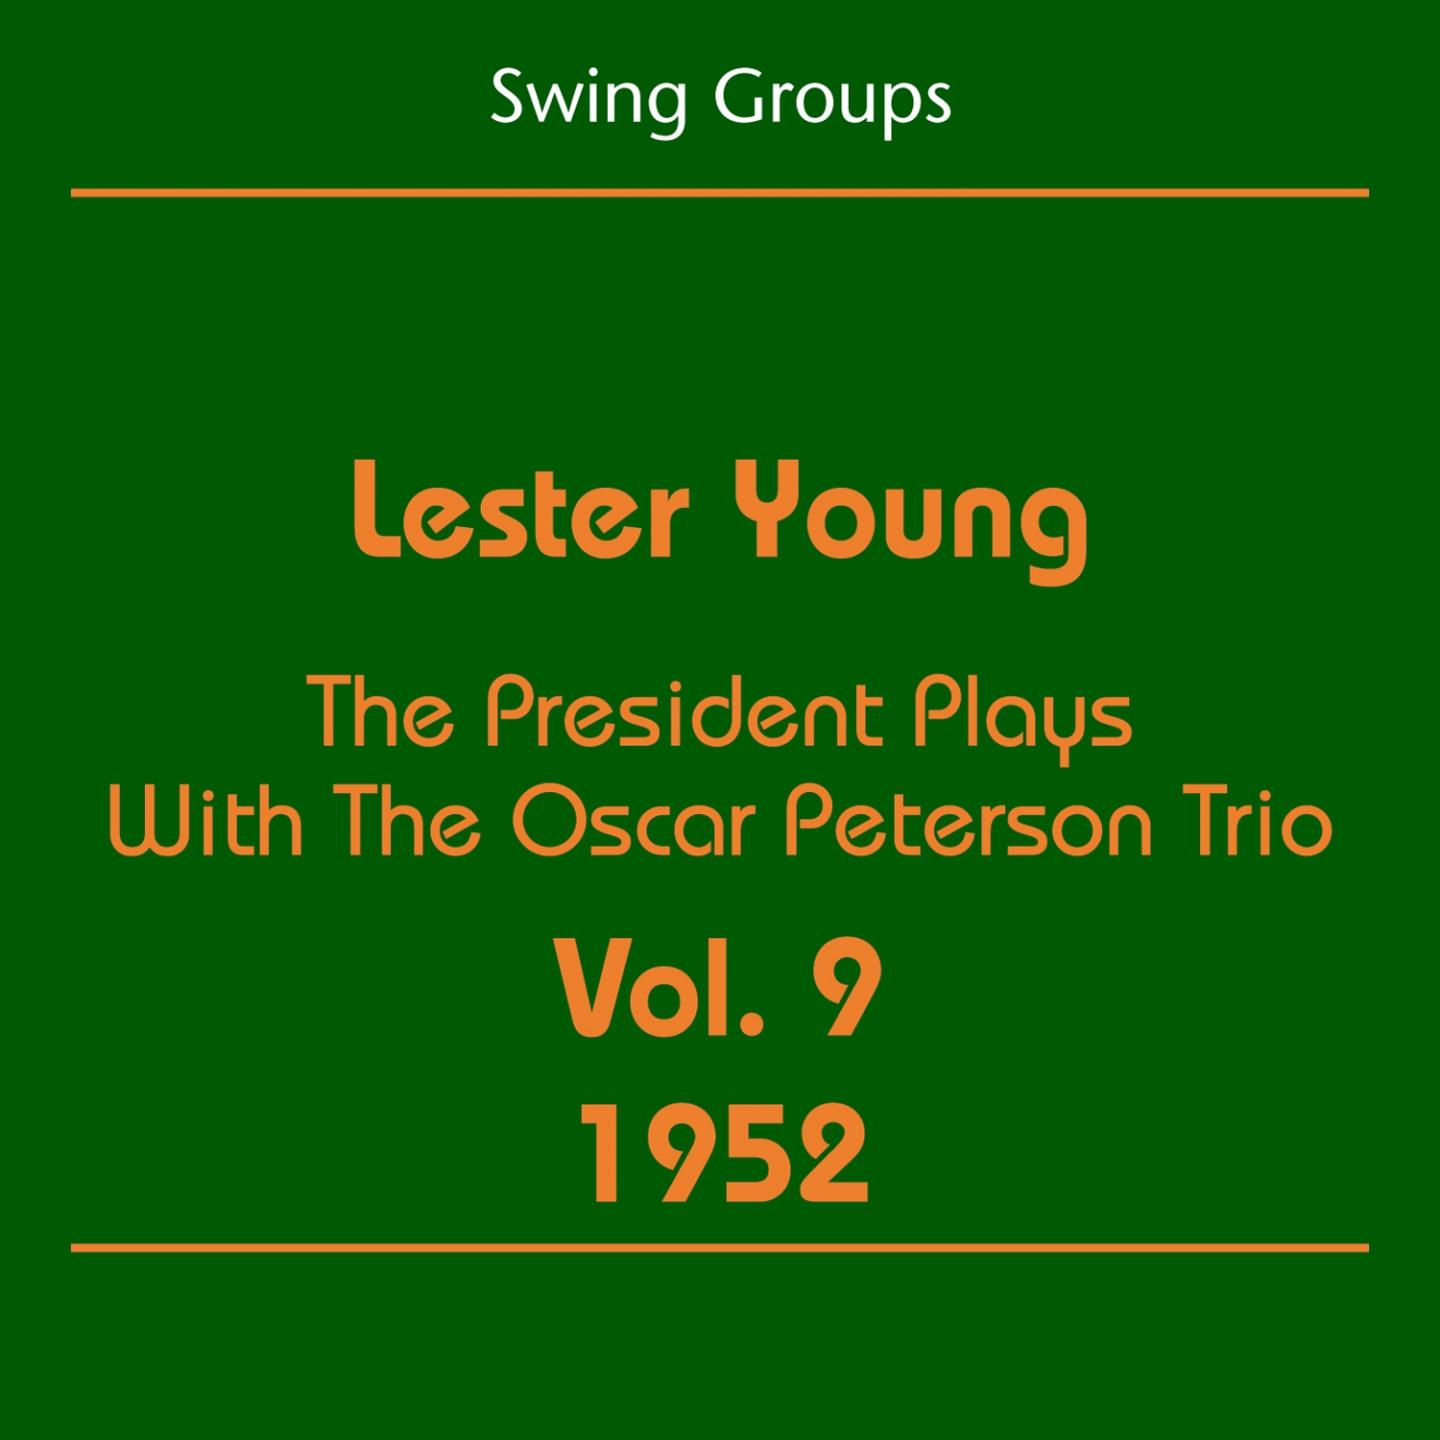 Постер альбома Swing Groups (Lester Young Volume 9 1952 - The President Plays With The Oscar Peterson Trio)